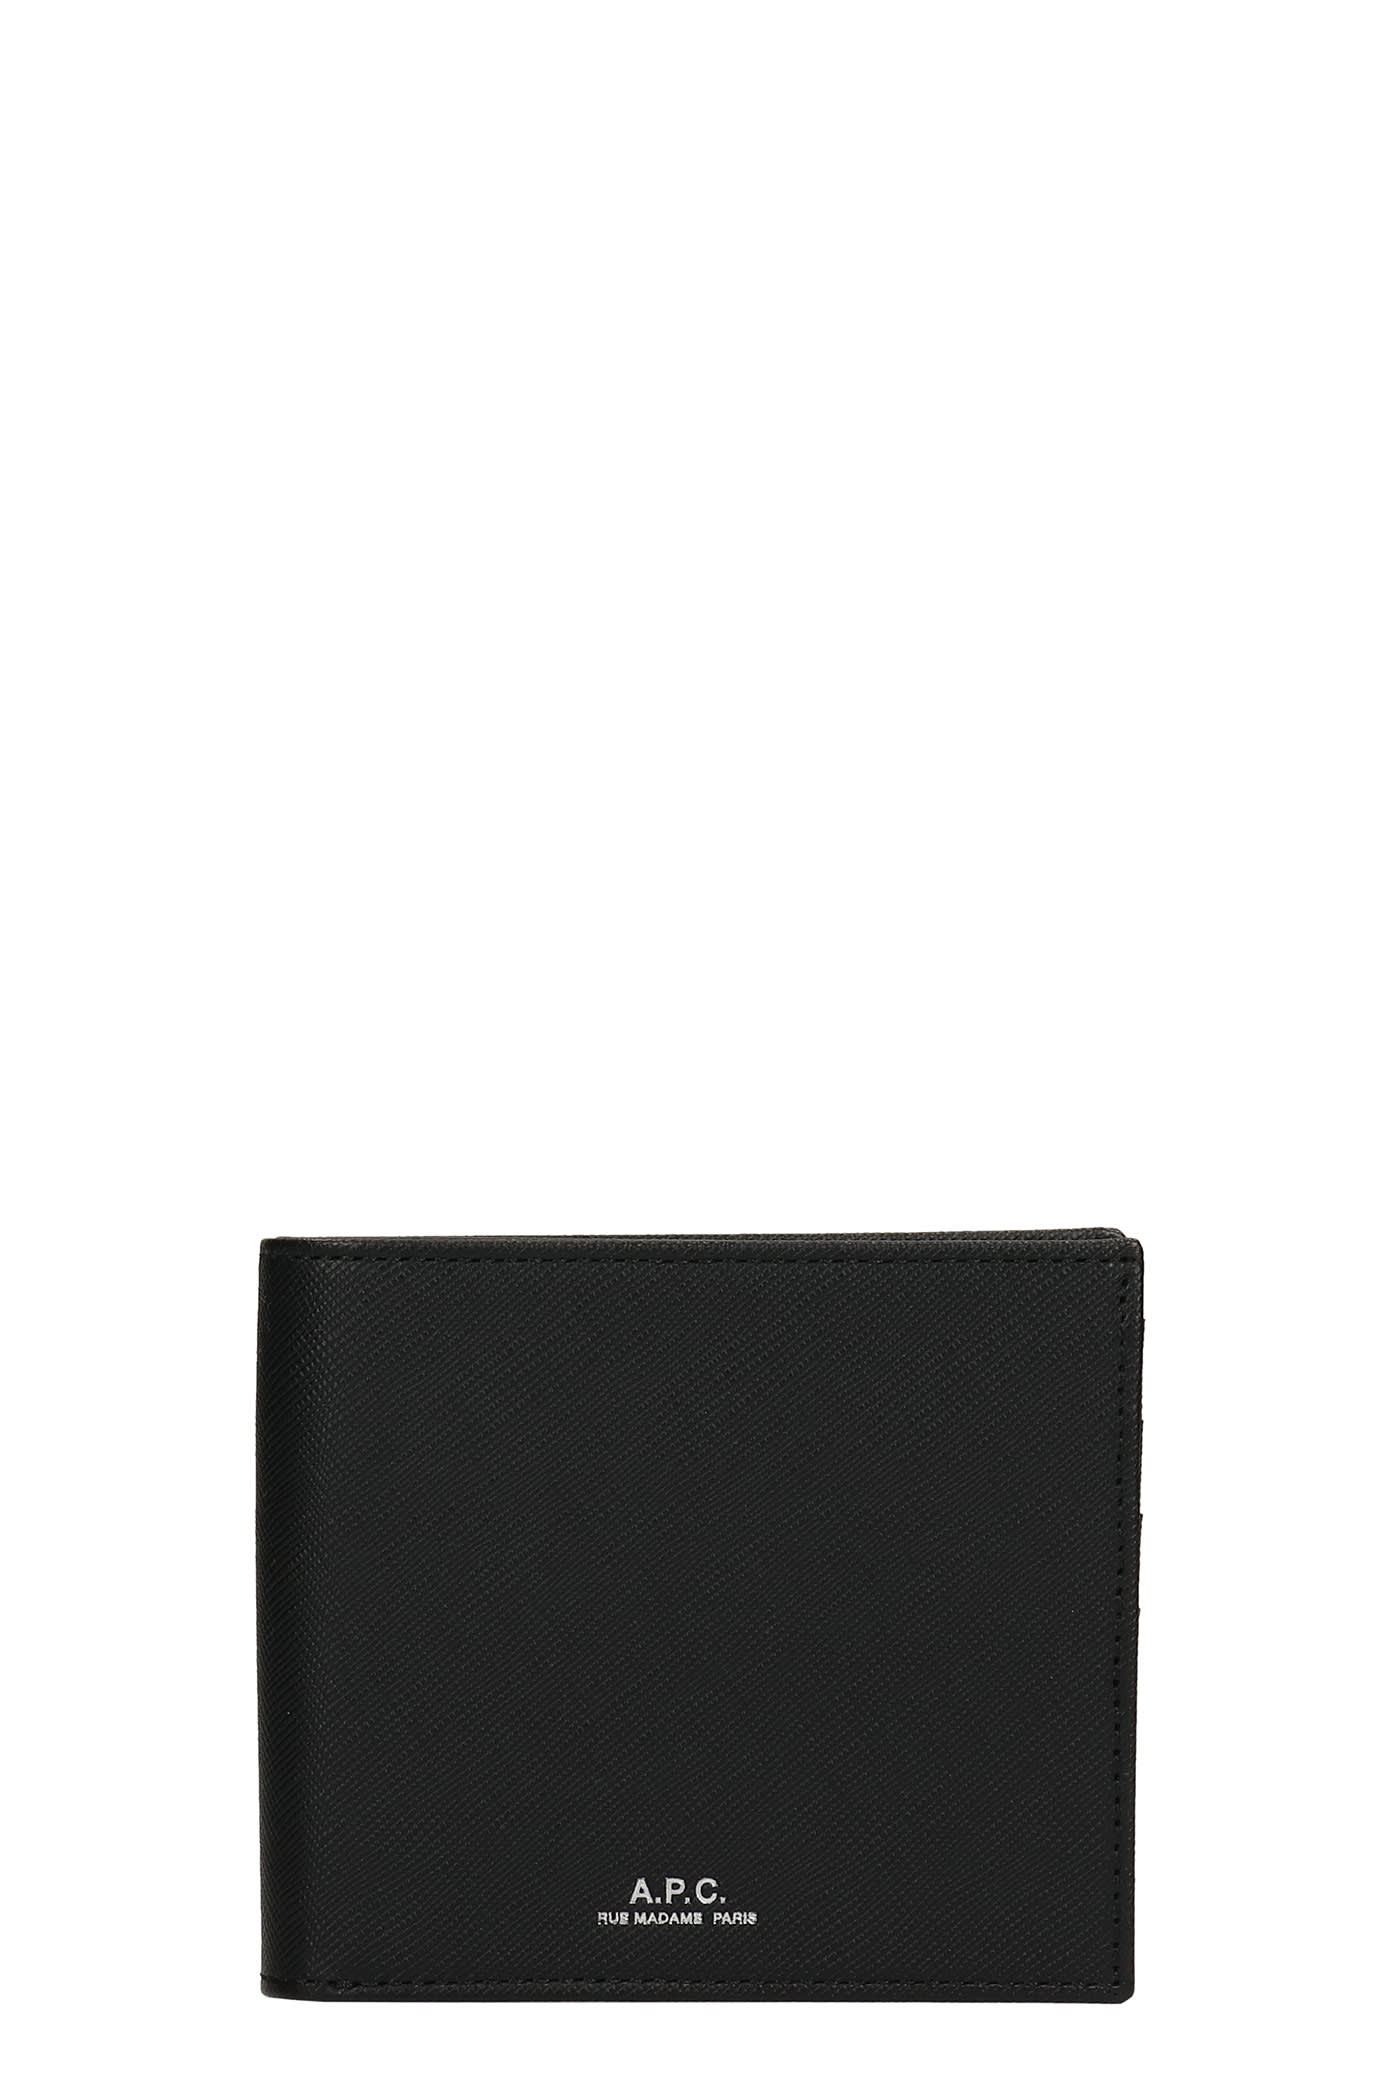 A.P.C. Aly Wallet In Black Leather